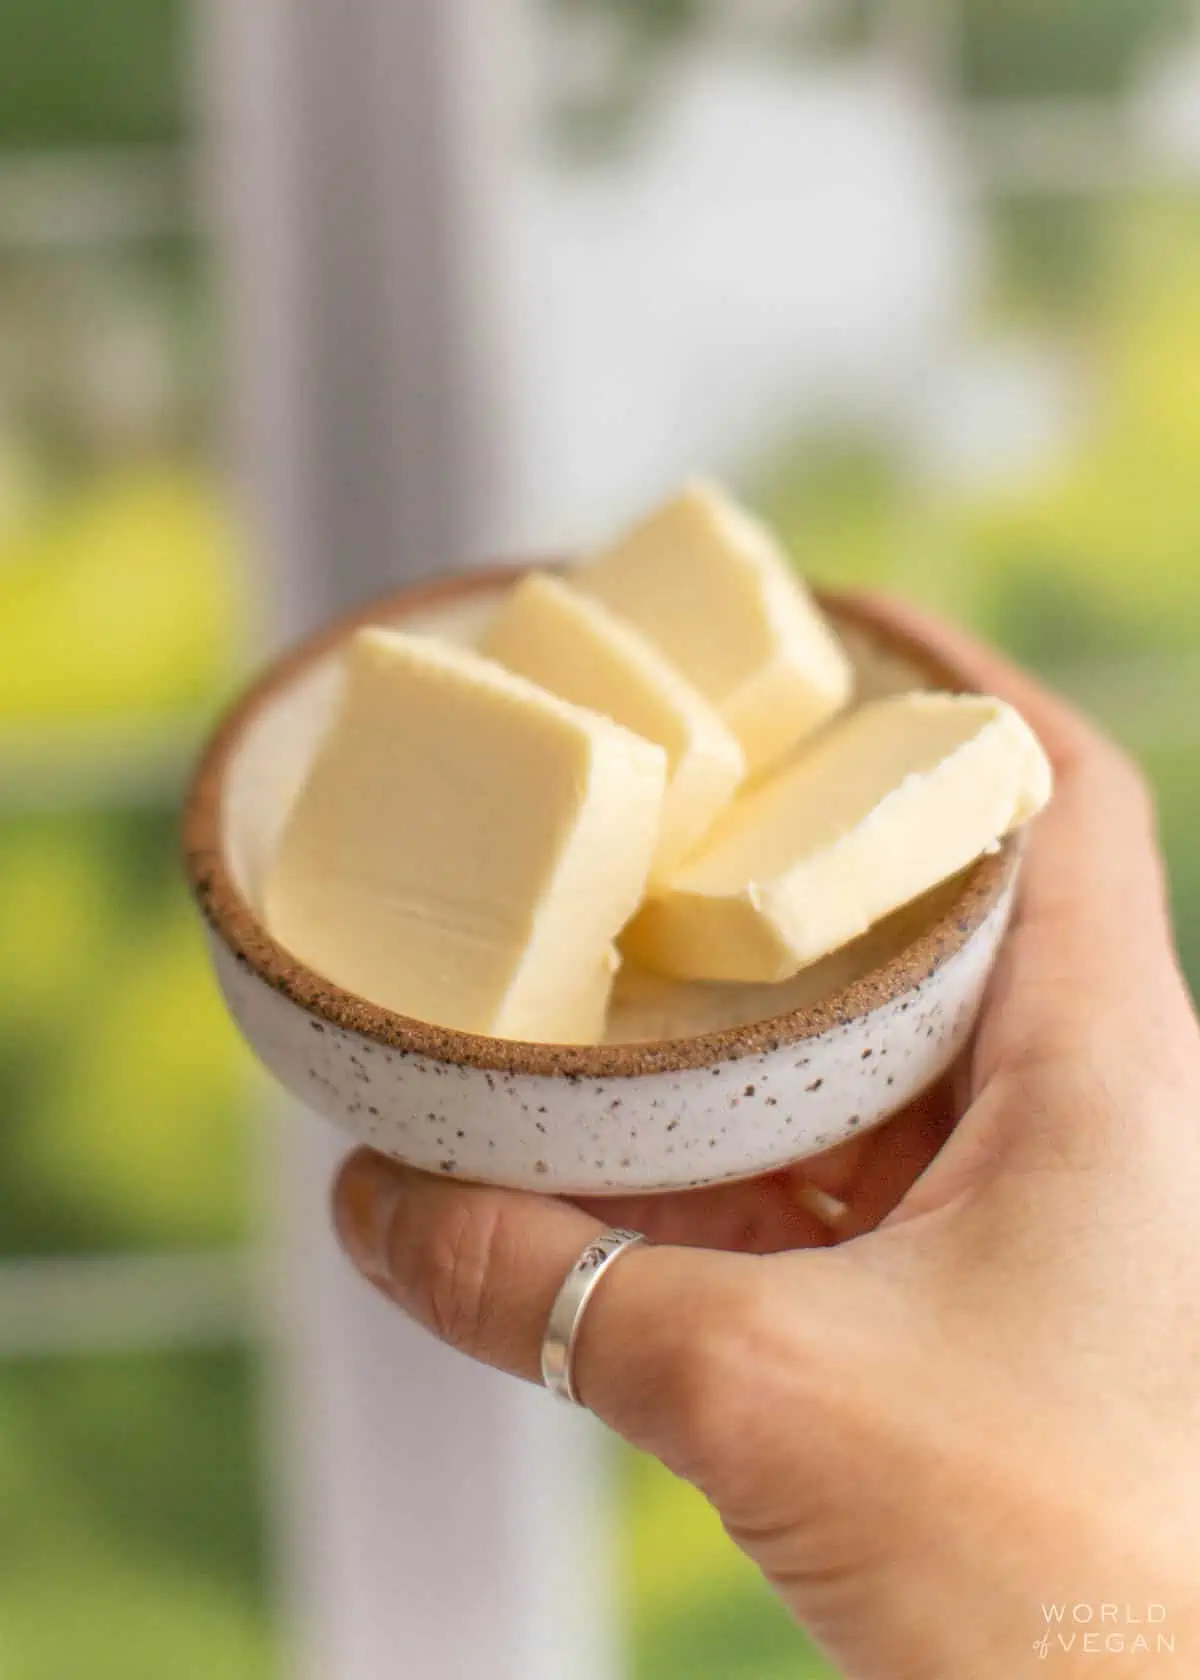 sliced dairy-free butter in a rustic ceramic dish